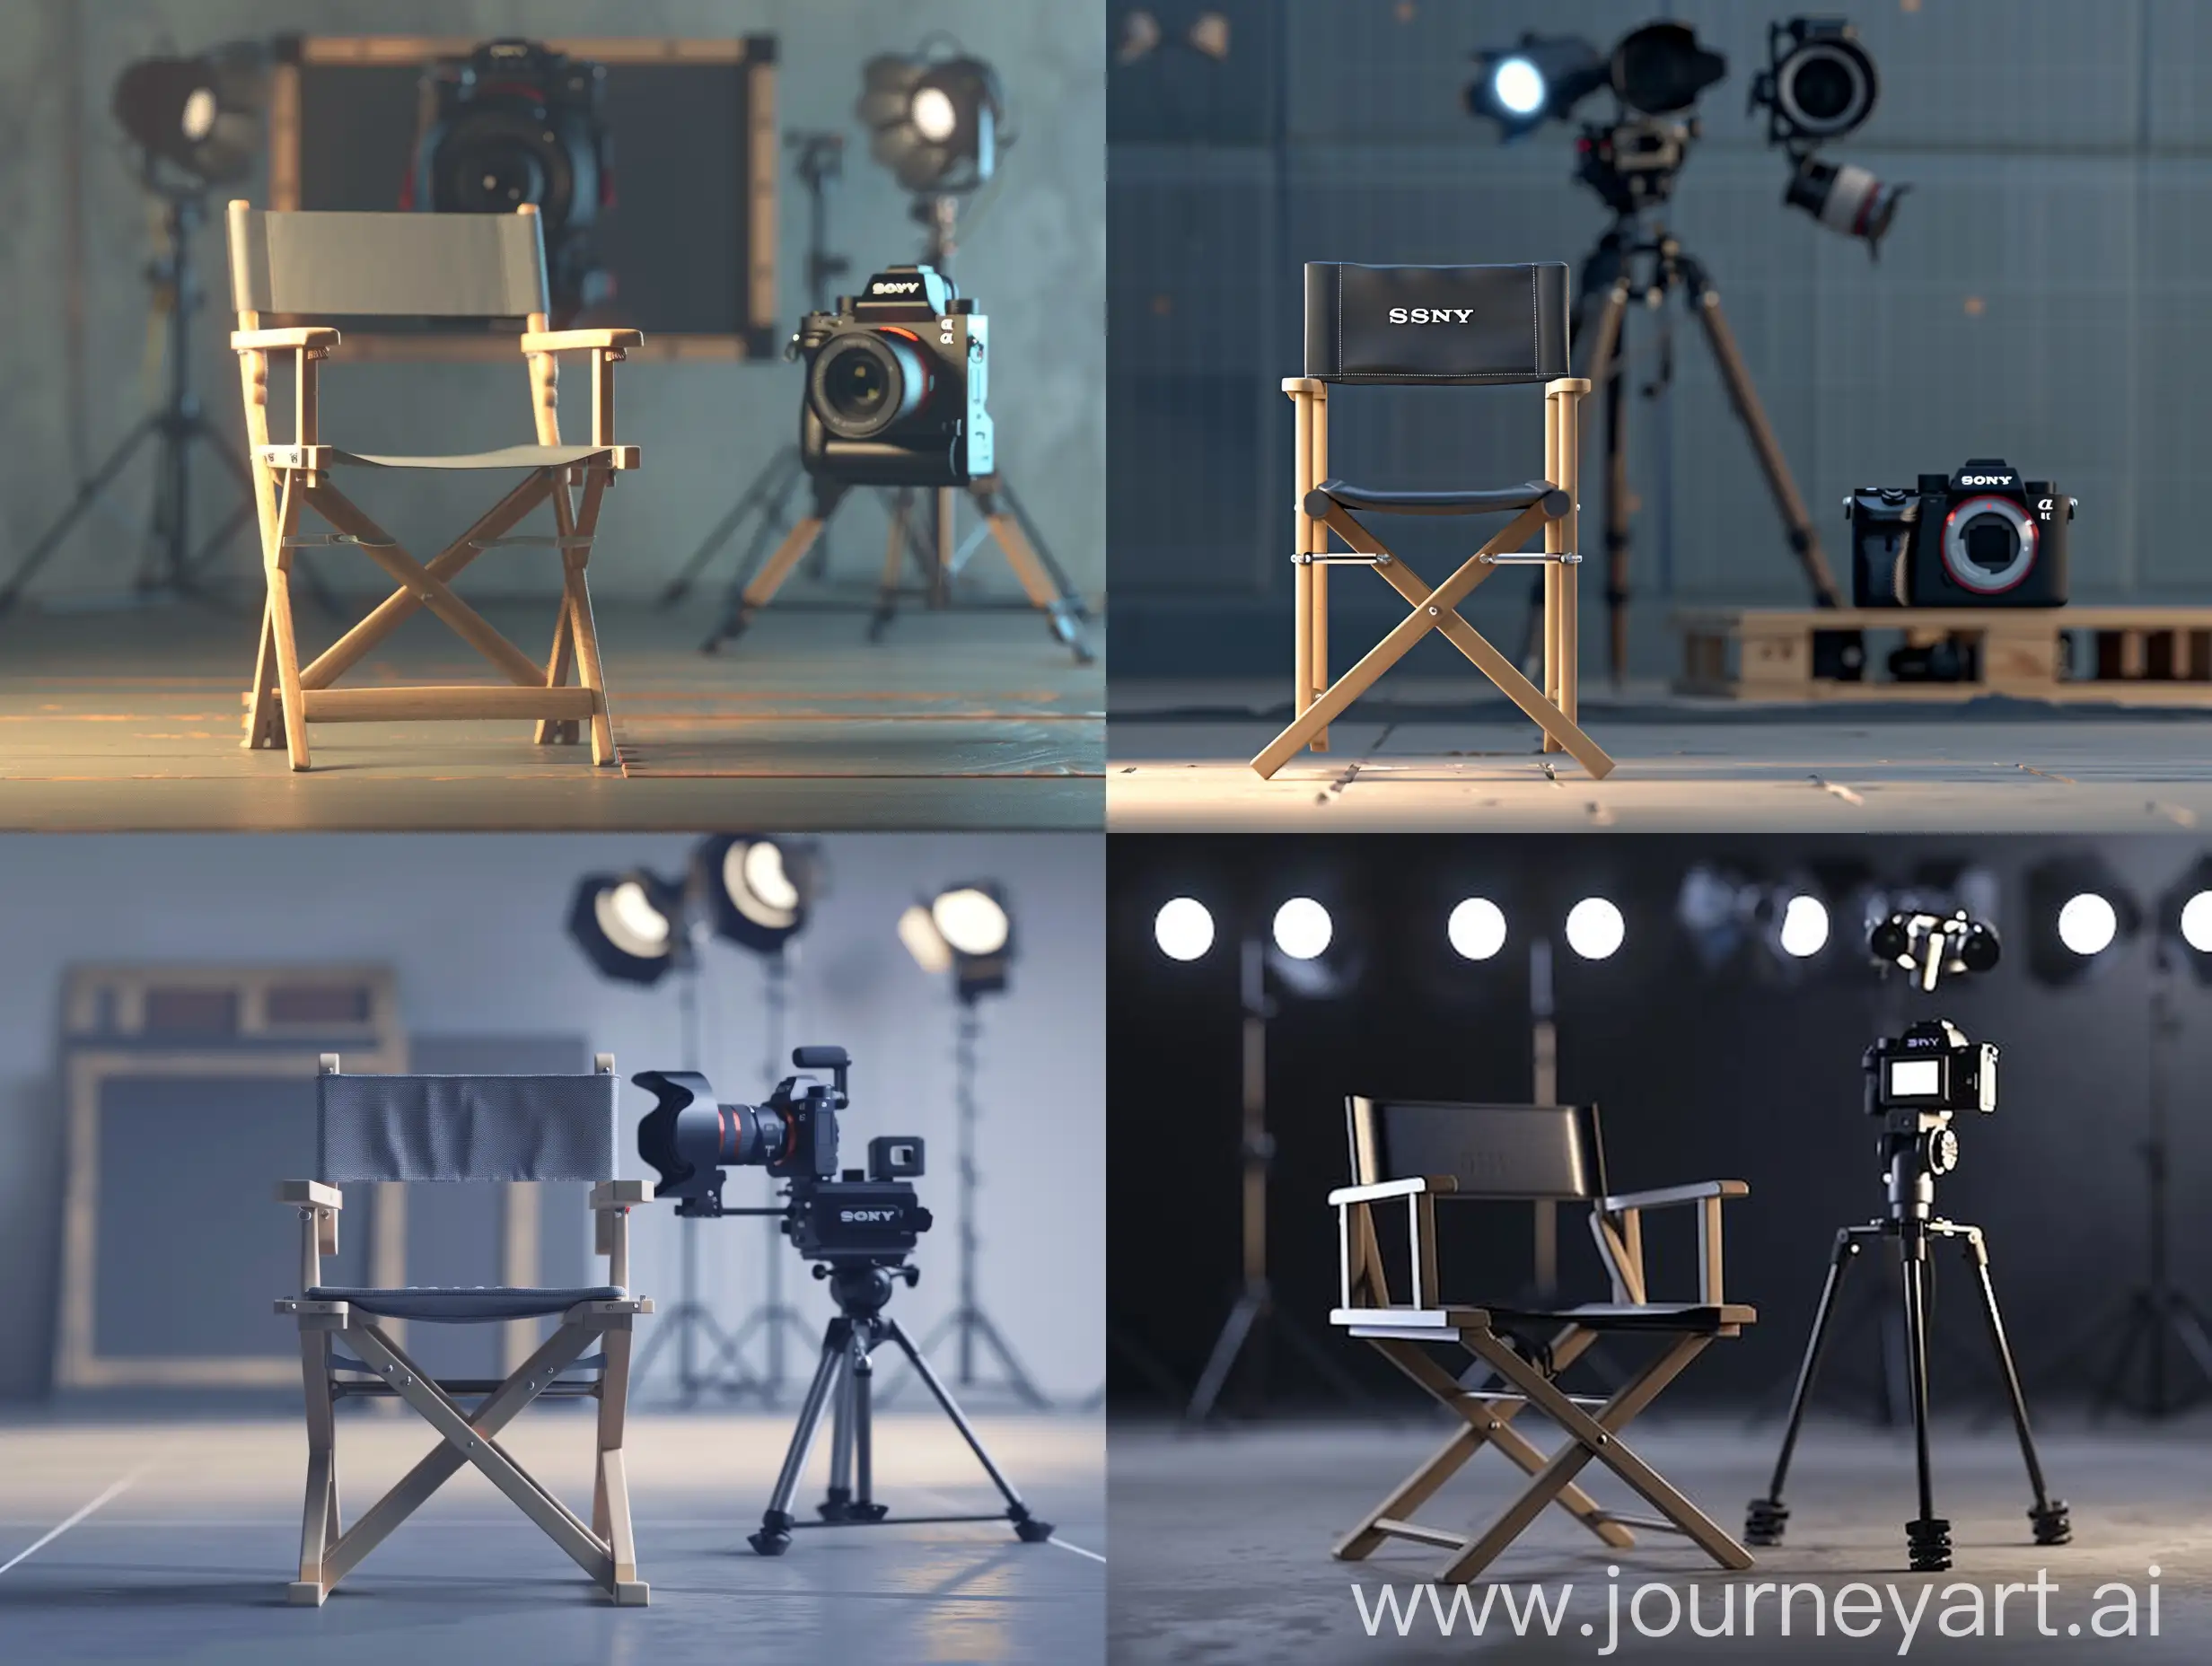 Empty-Directors-Chair-with-Sony-Camera-Setup